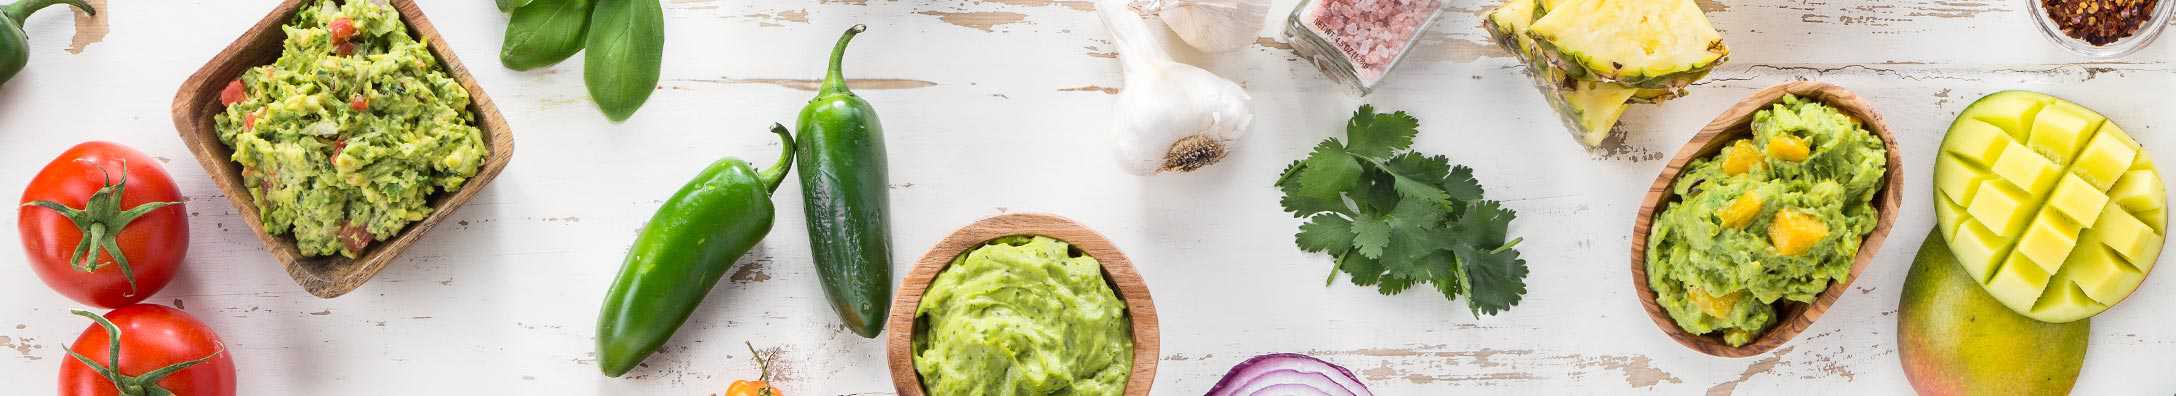 guacamole and produce on a tabletop